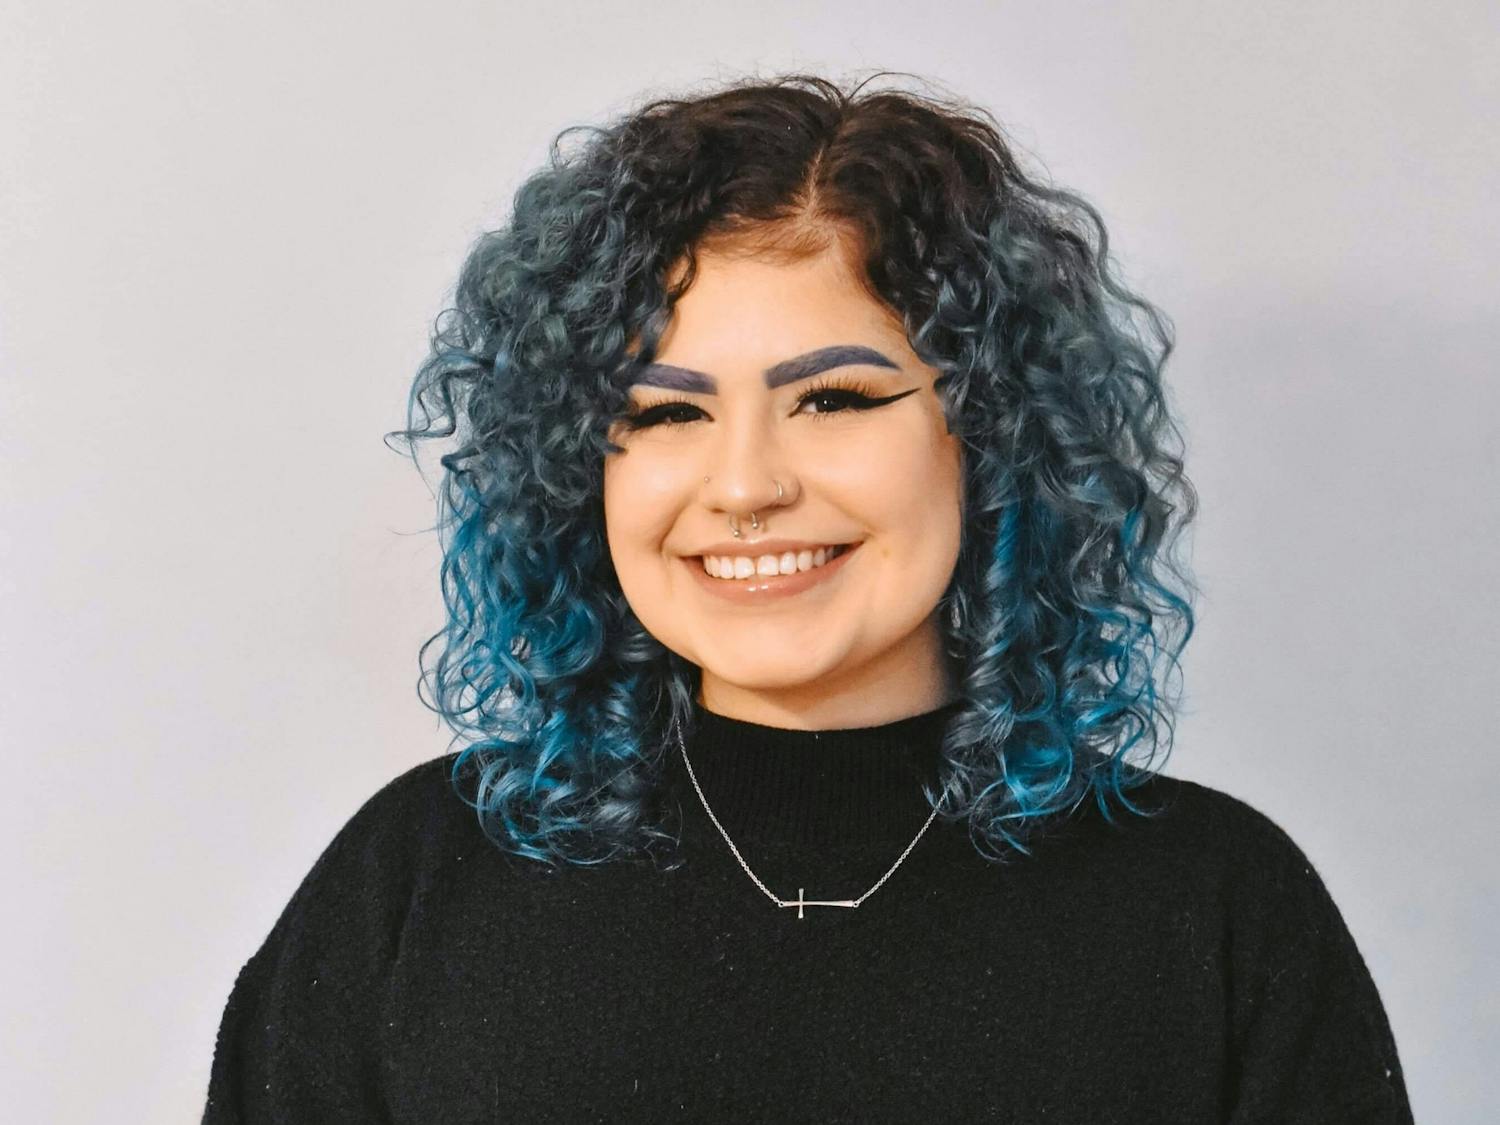 Alyssa Palacios hopes to return to UB in the fall, but she feels that finances shouldn’t be the “determining factor” on whether or not she receives an education.